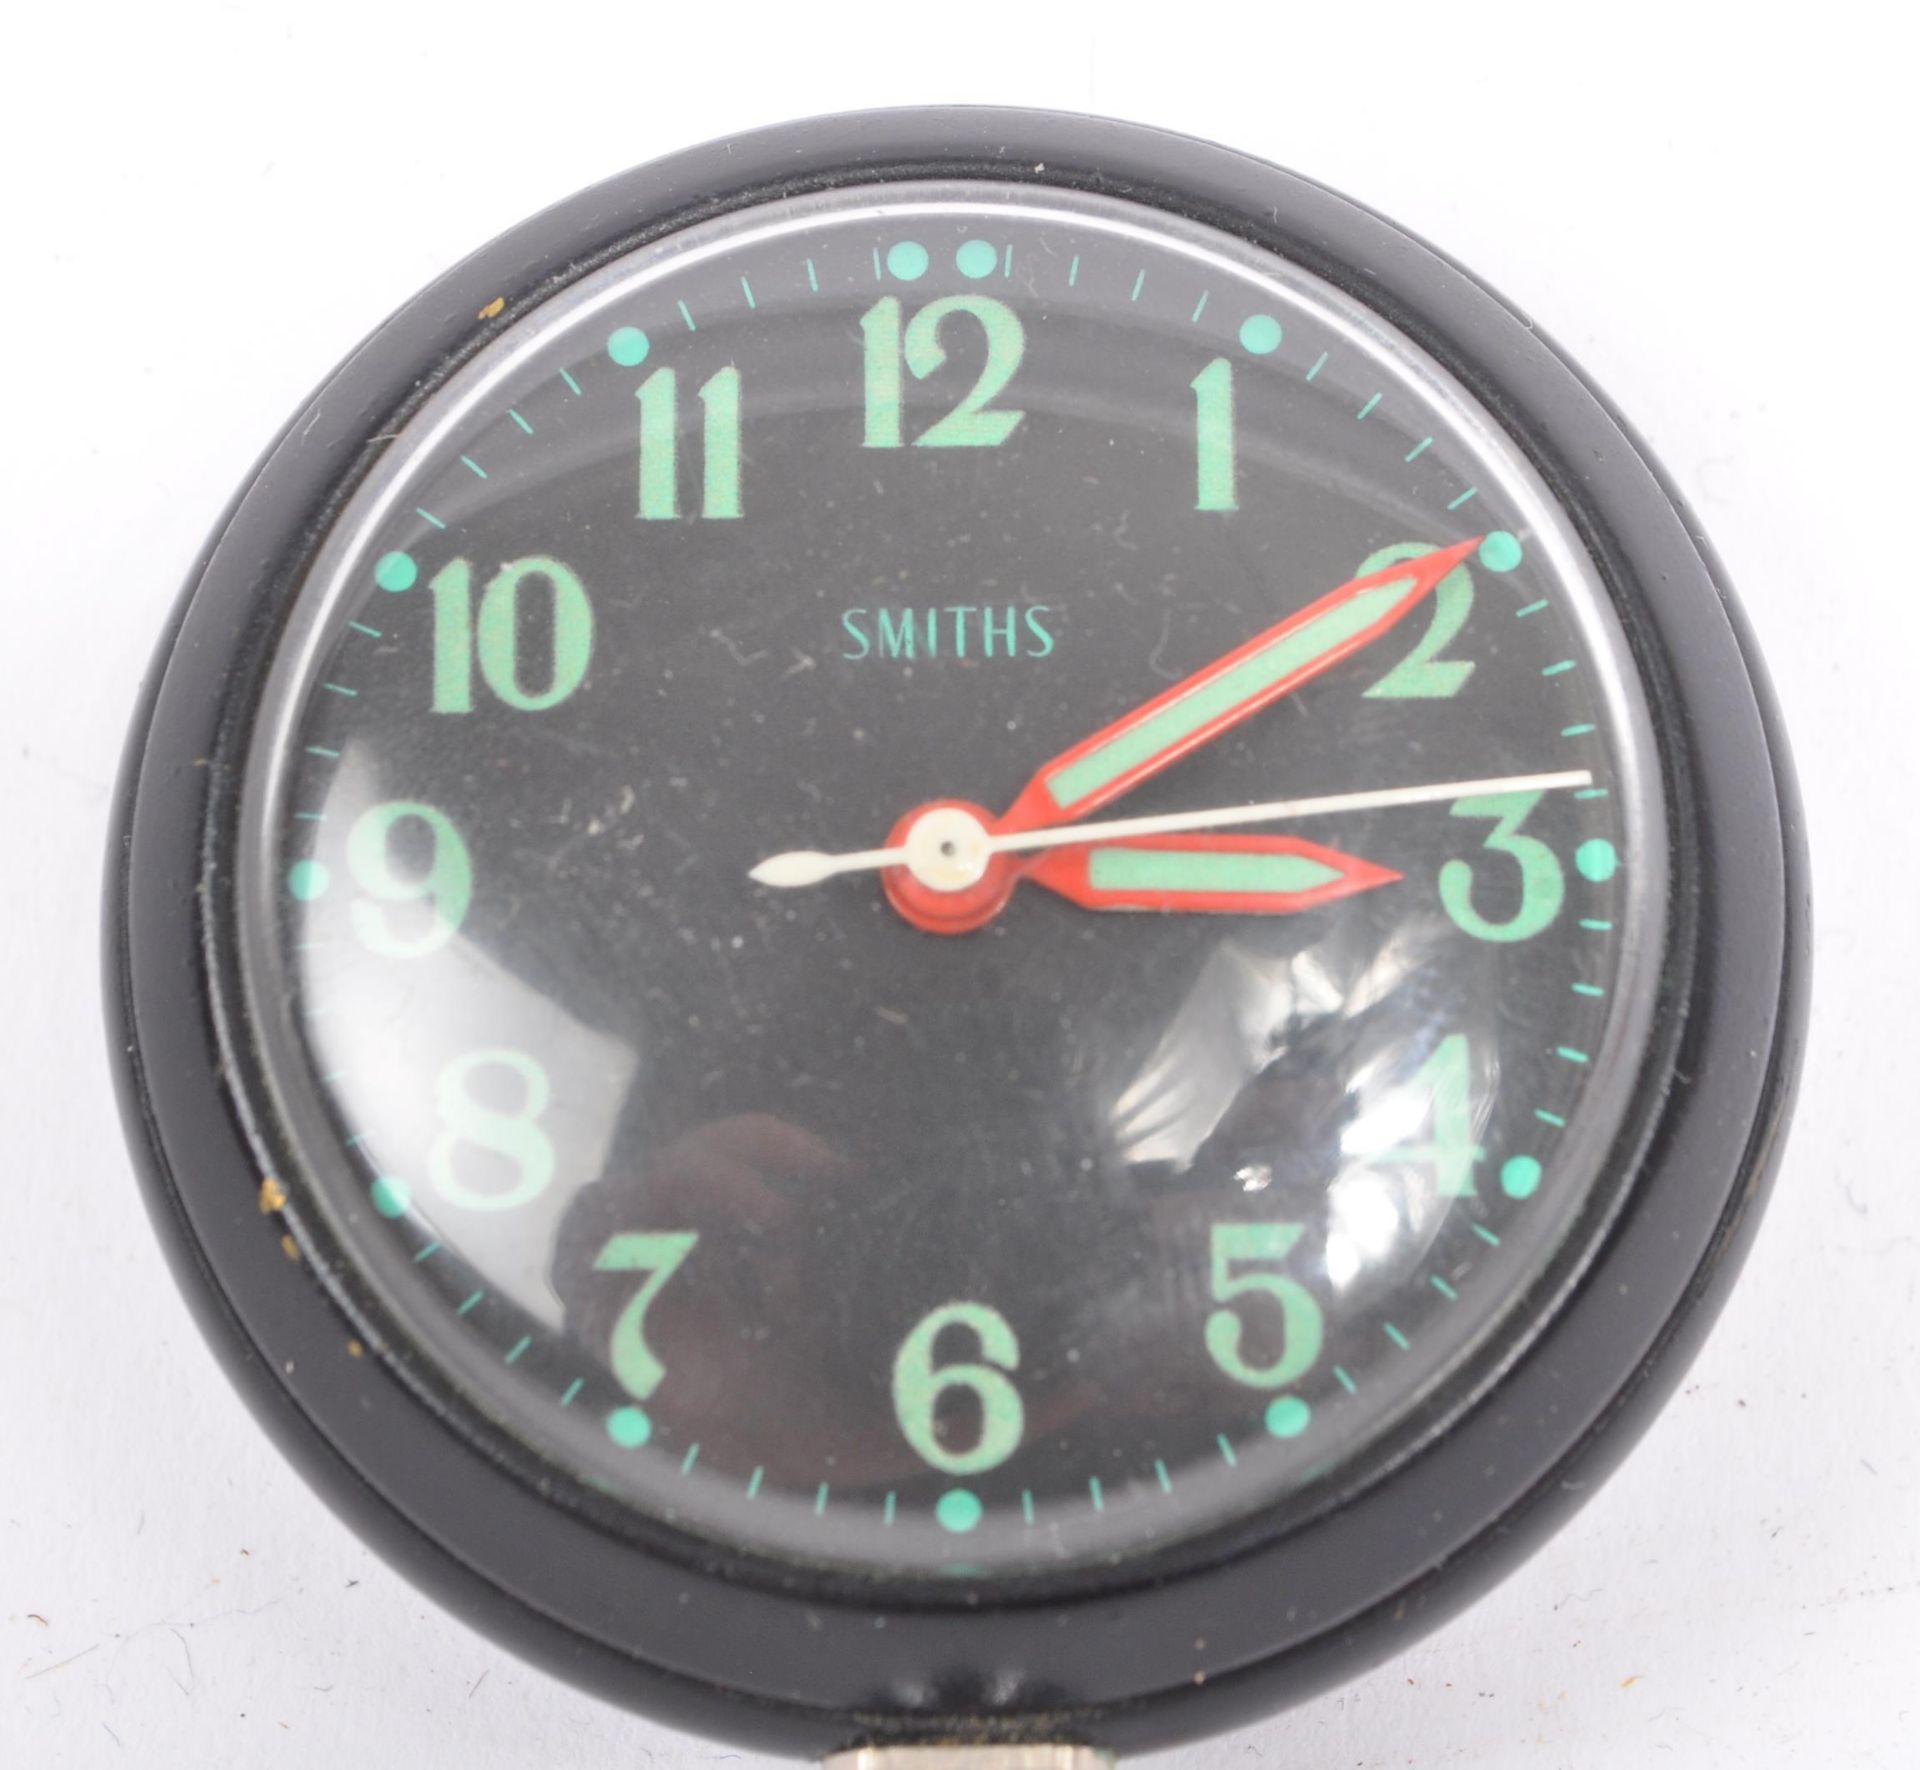 SMITHS AUTOMOBILE CAR DASHBOARD RALLY CLOCK TIME PIECE - Image 3 of 6